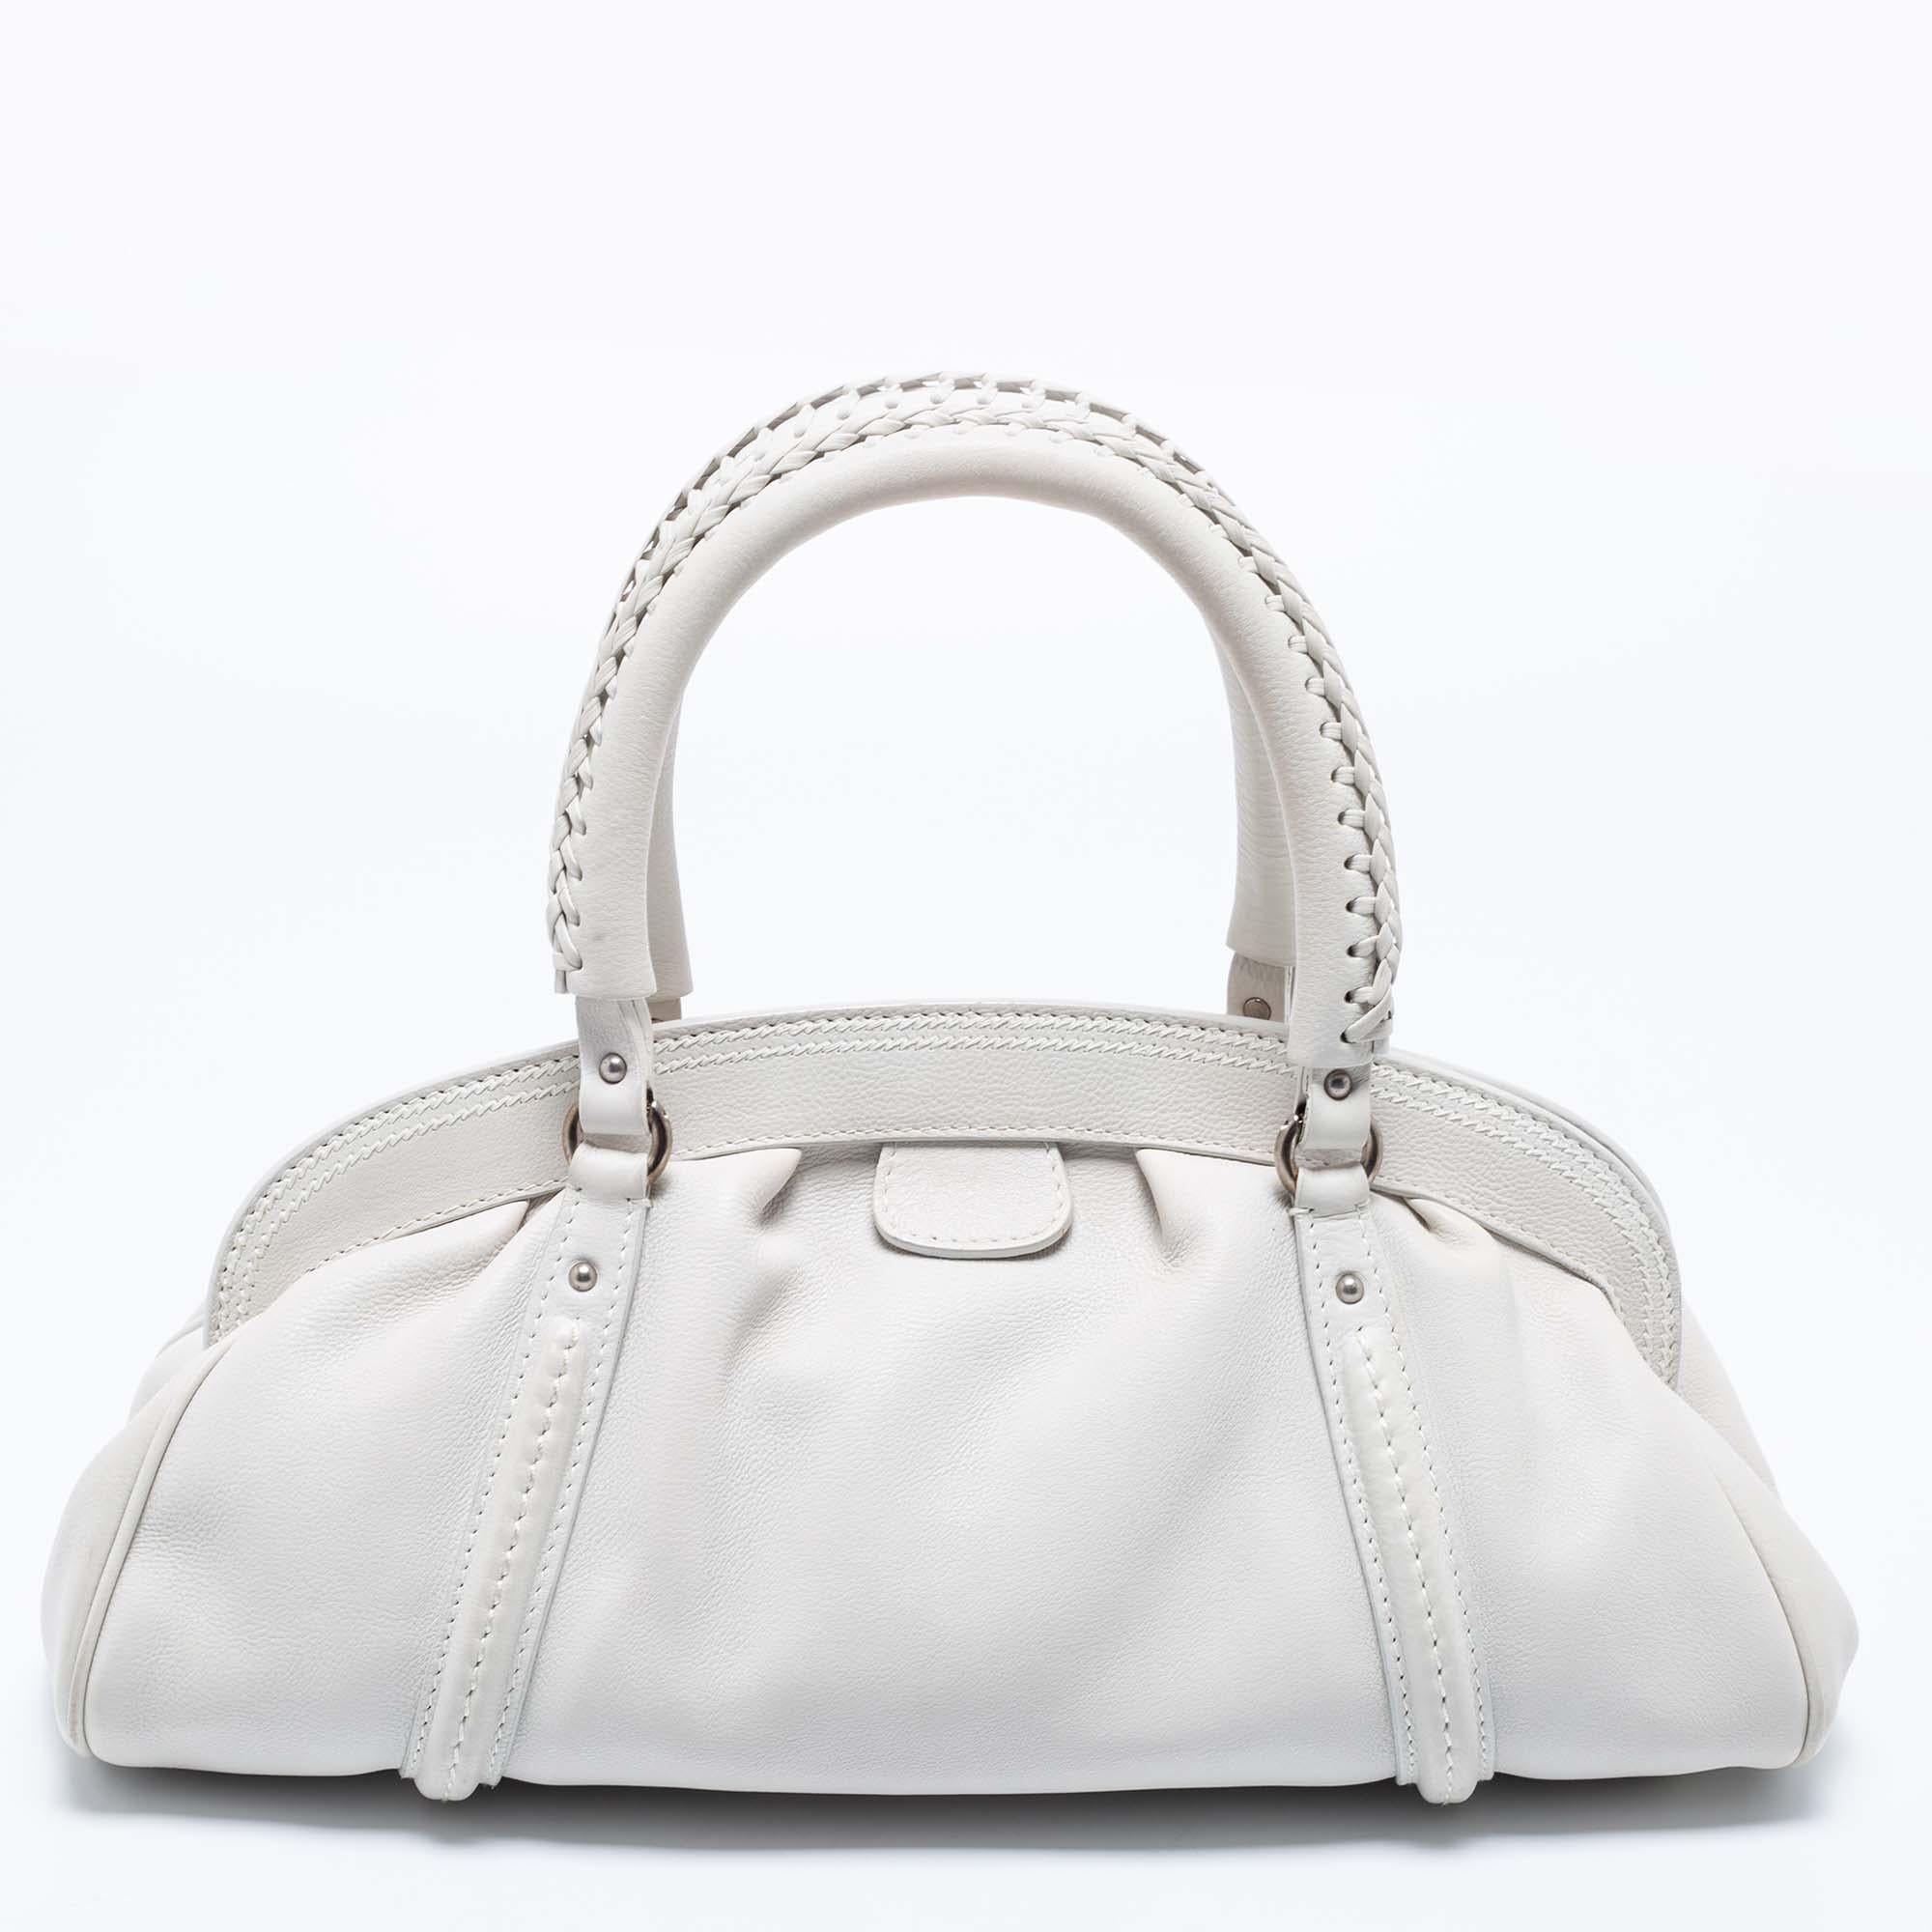 The branded accent at the front lends this Dior satchel a luxe update and high appeal. Crafted from leather, it can be carried conveniently with dual handles at the top, and it is equipped with a roomy lined interior. The frame at the top and the